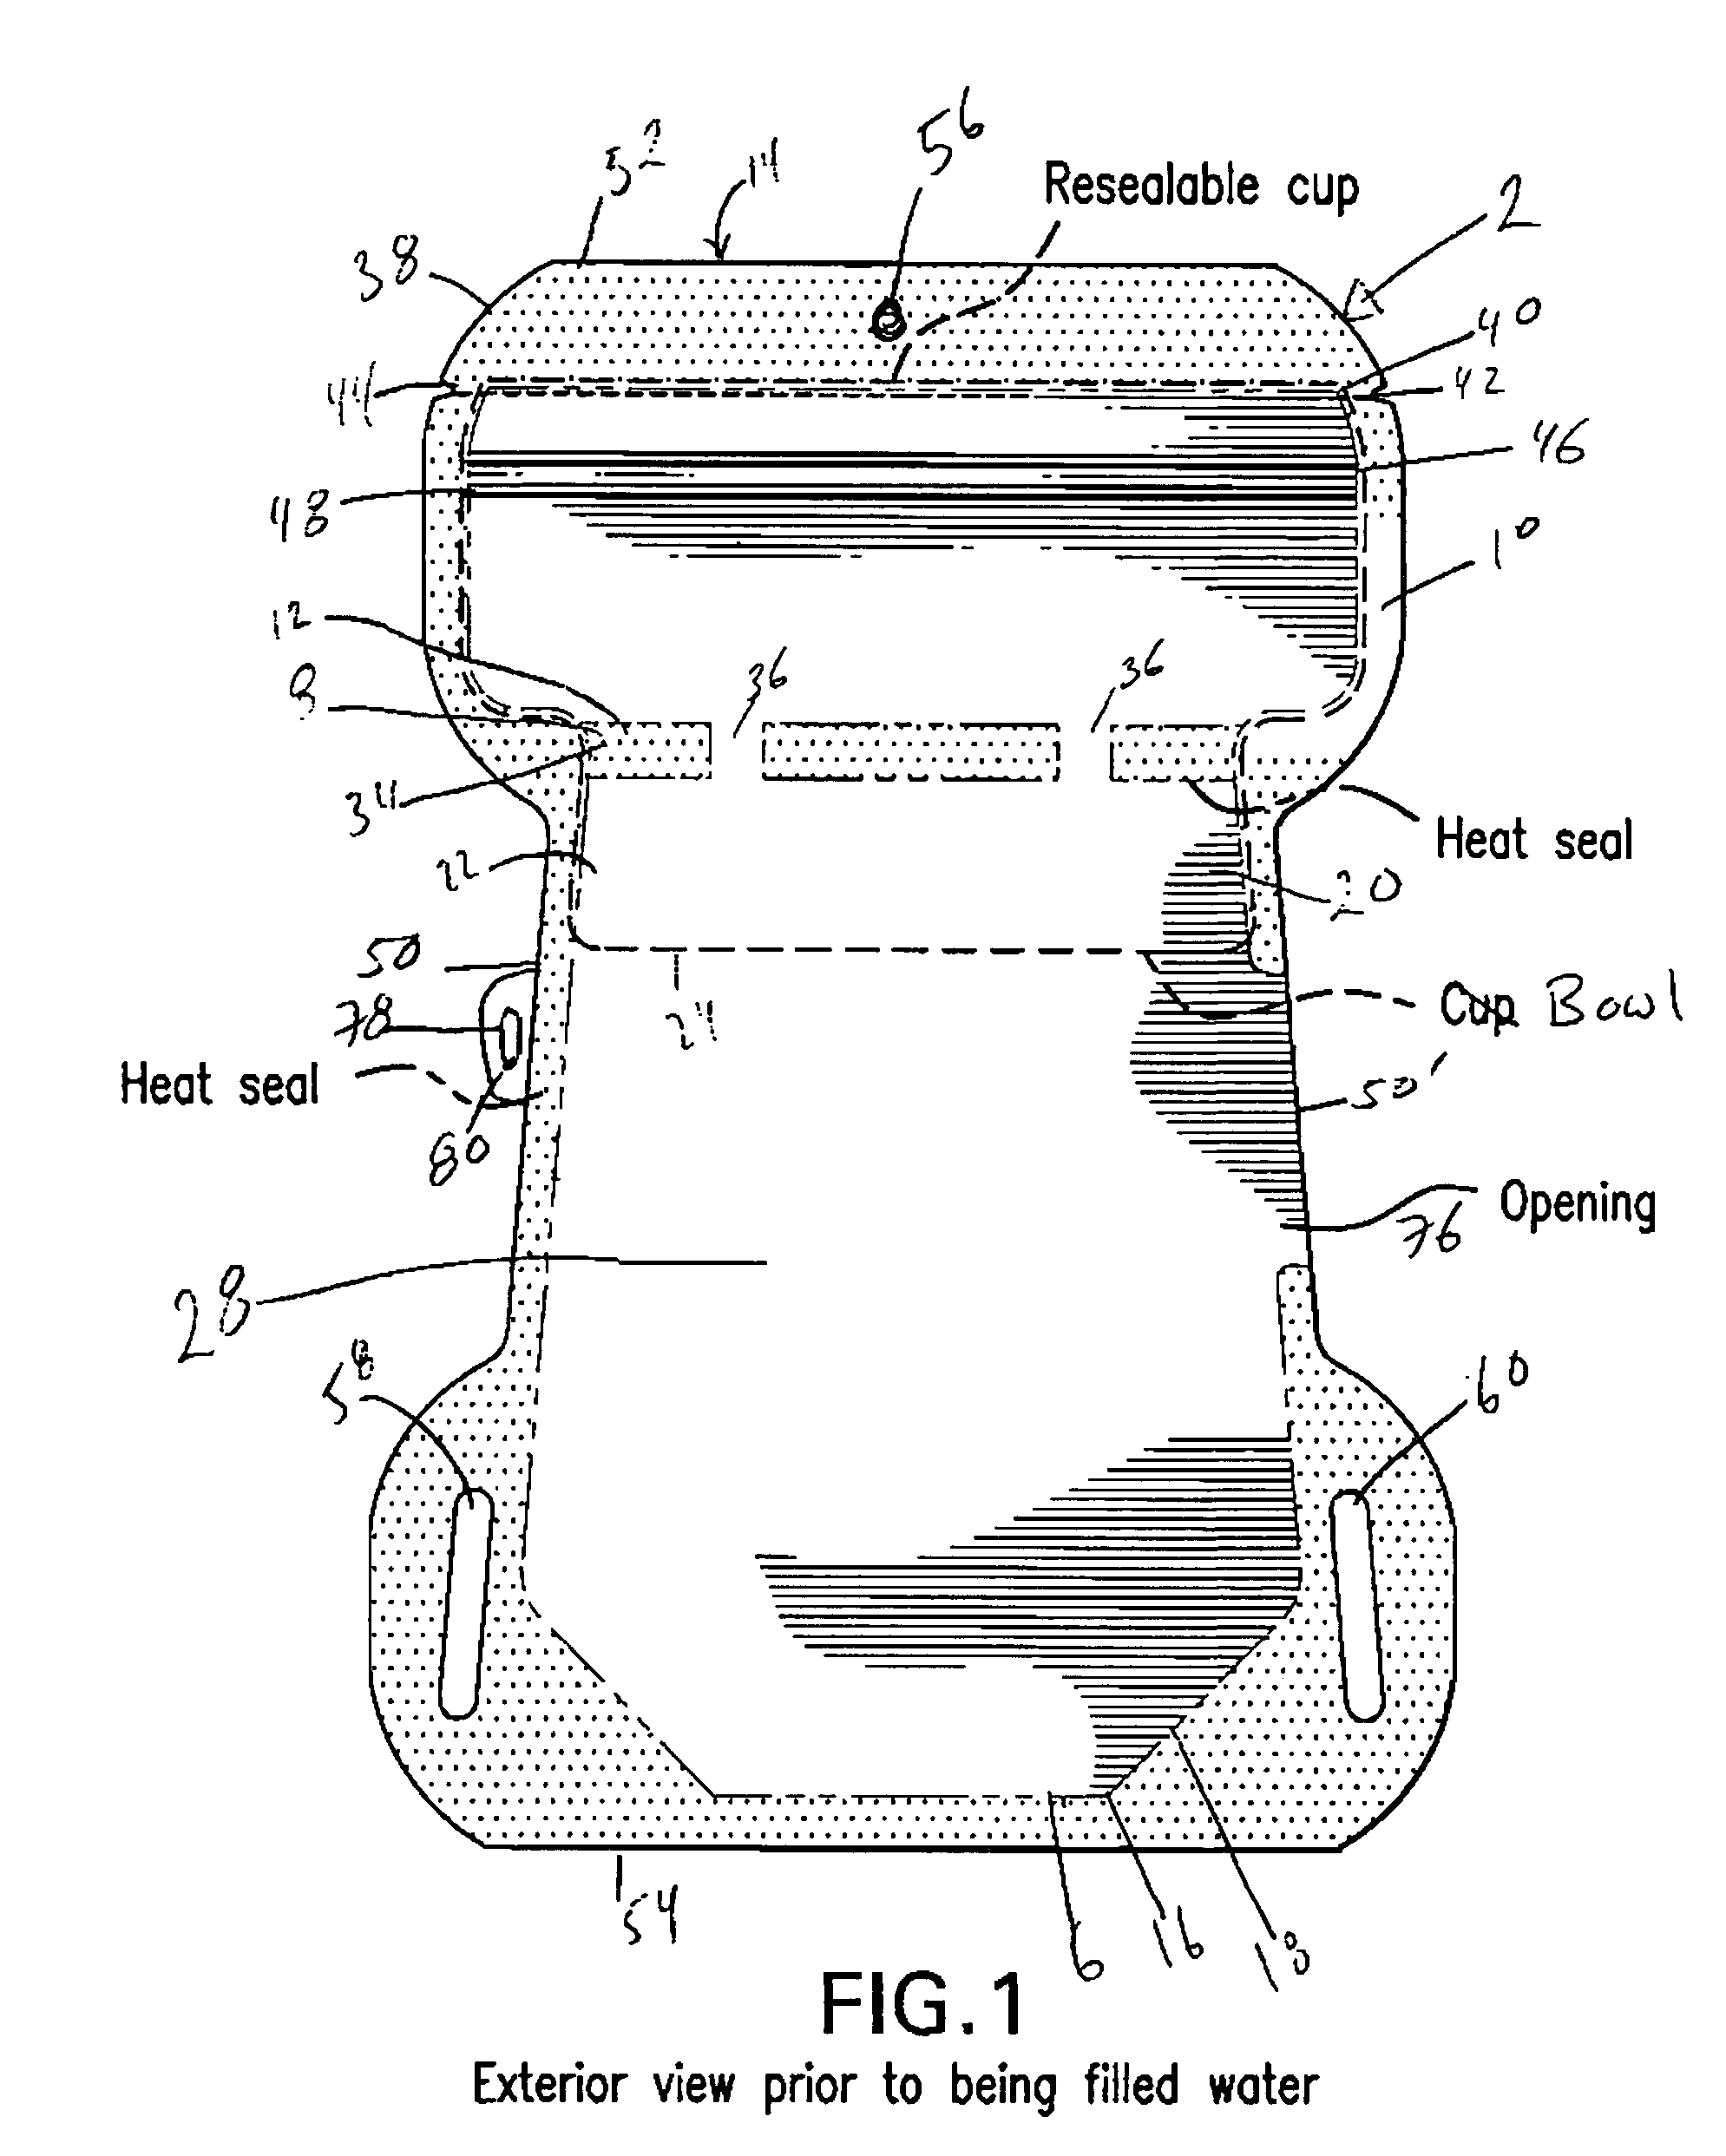 Resealable bowl-in-pouch arrangement and method